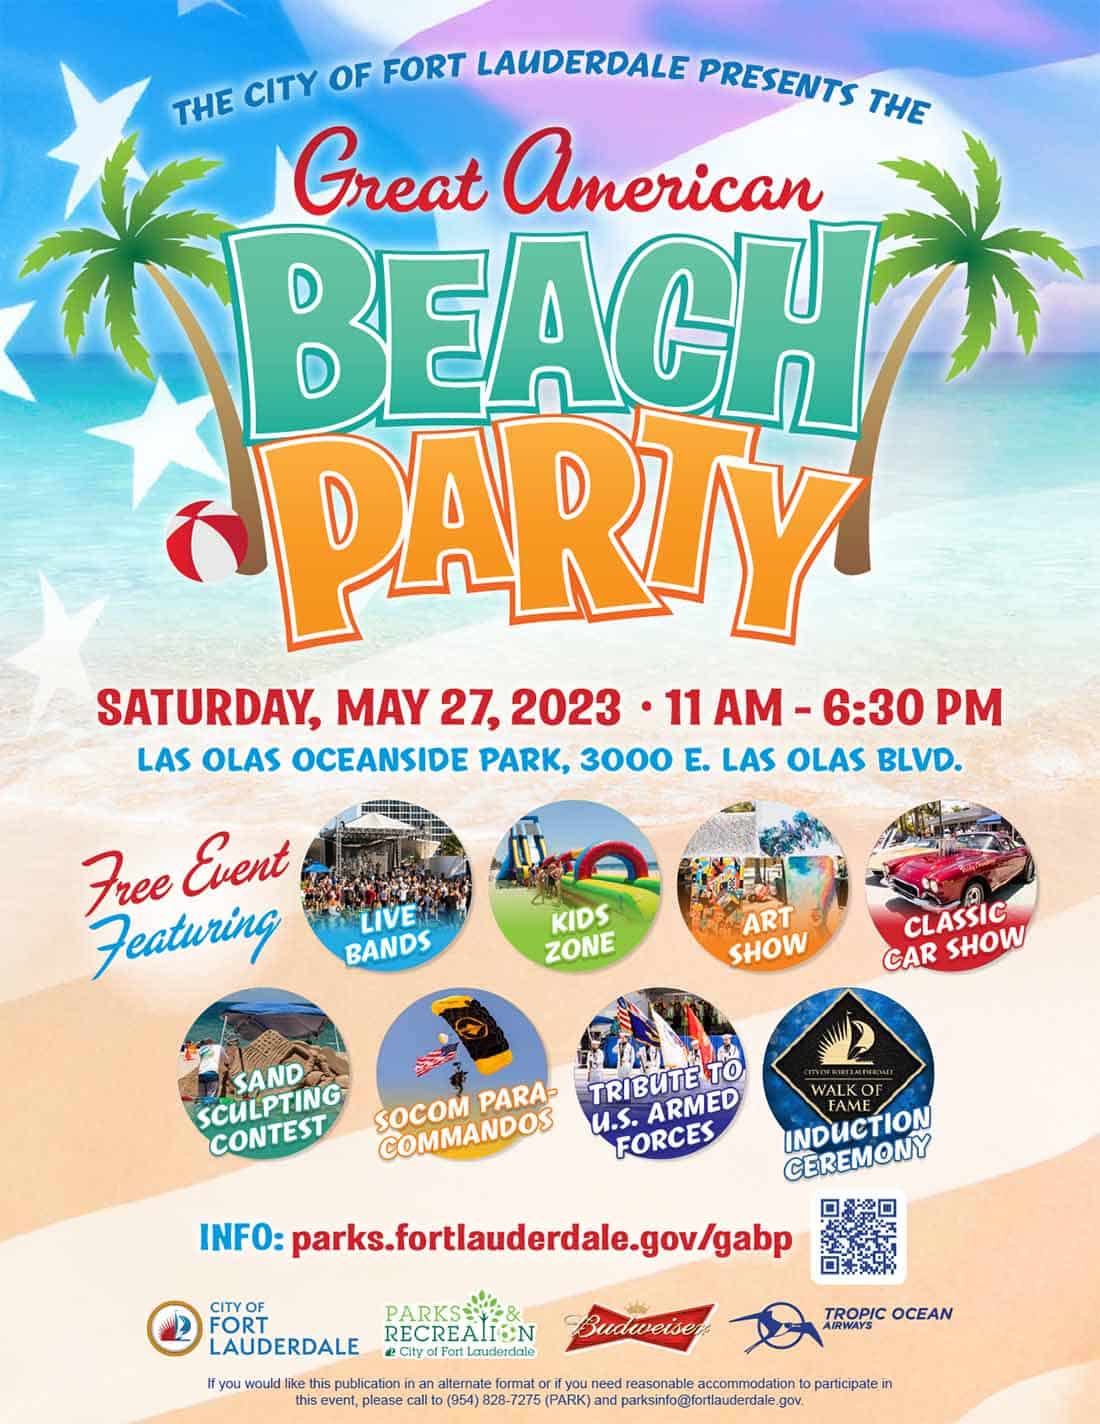 The Great American Beach Party - Saturday, May 27, 2023